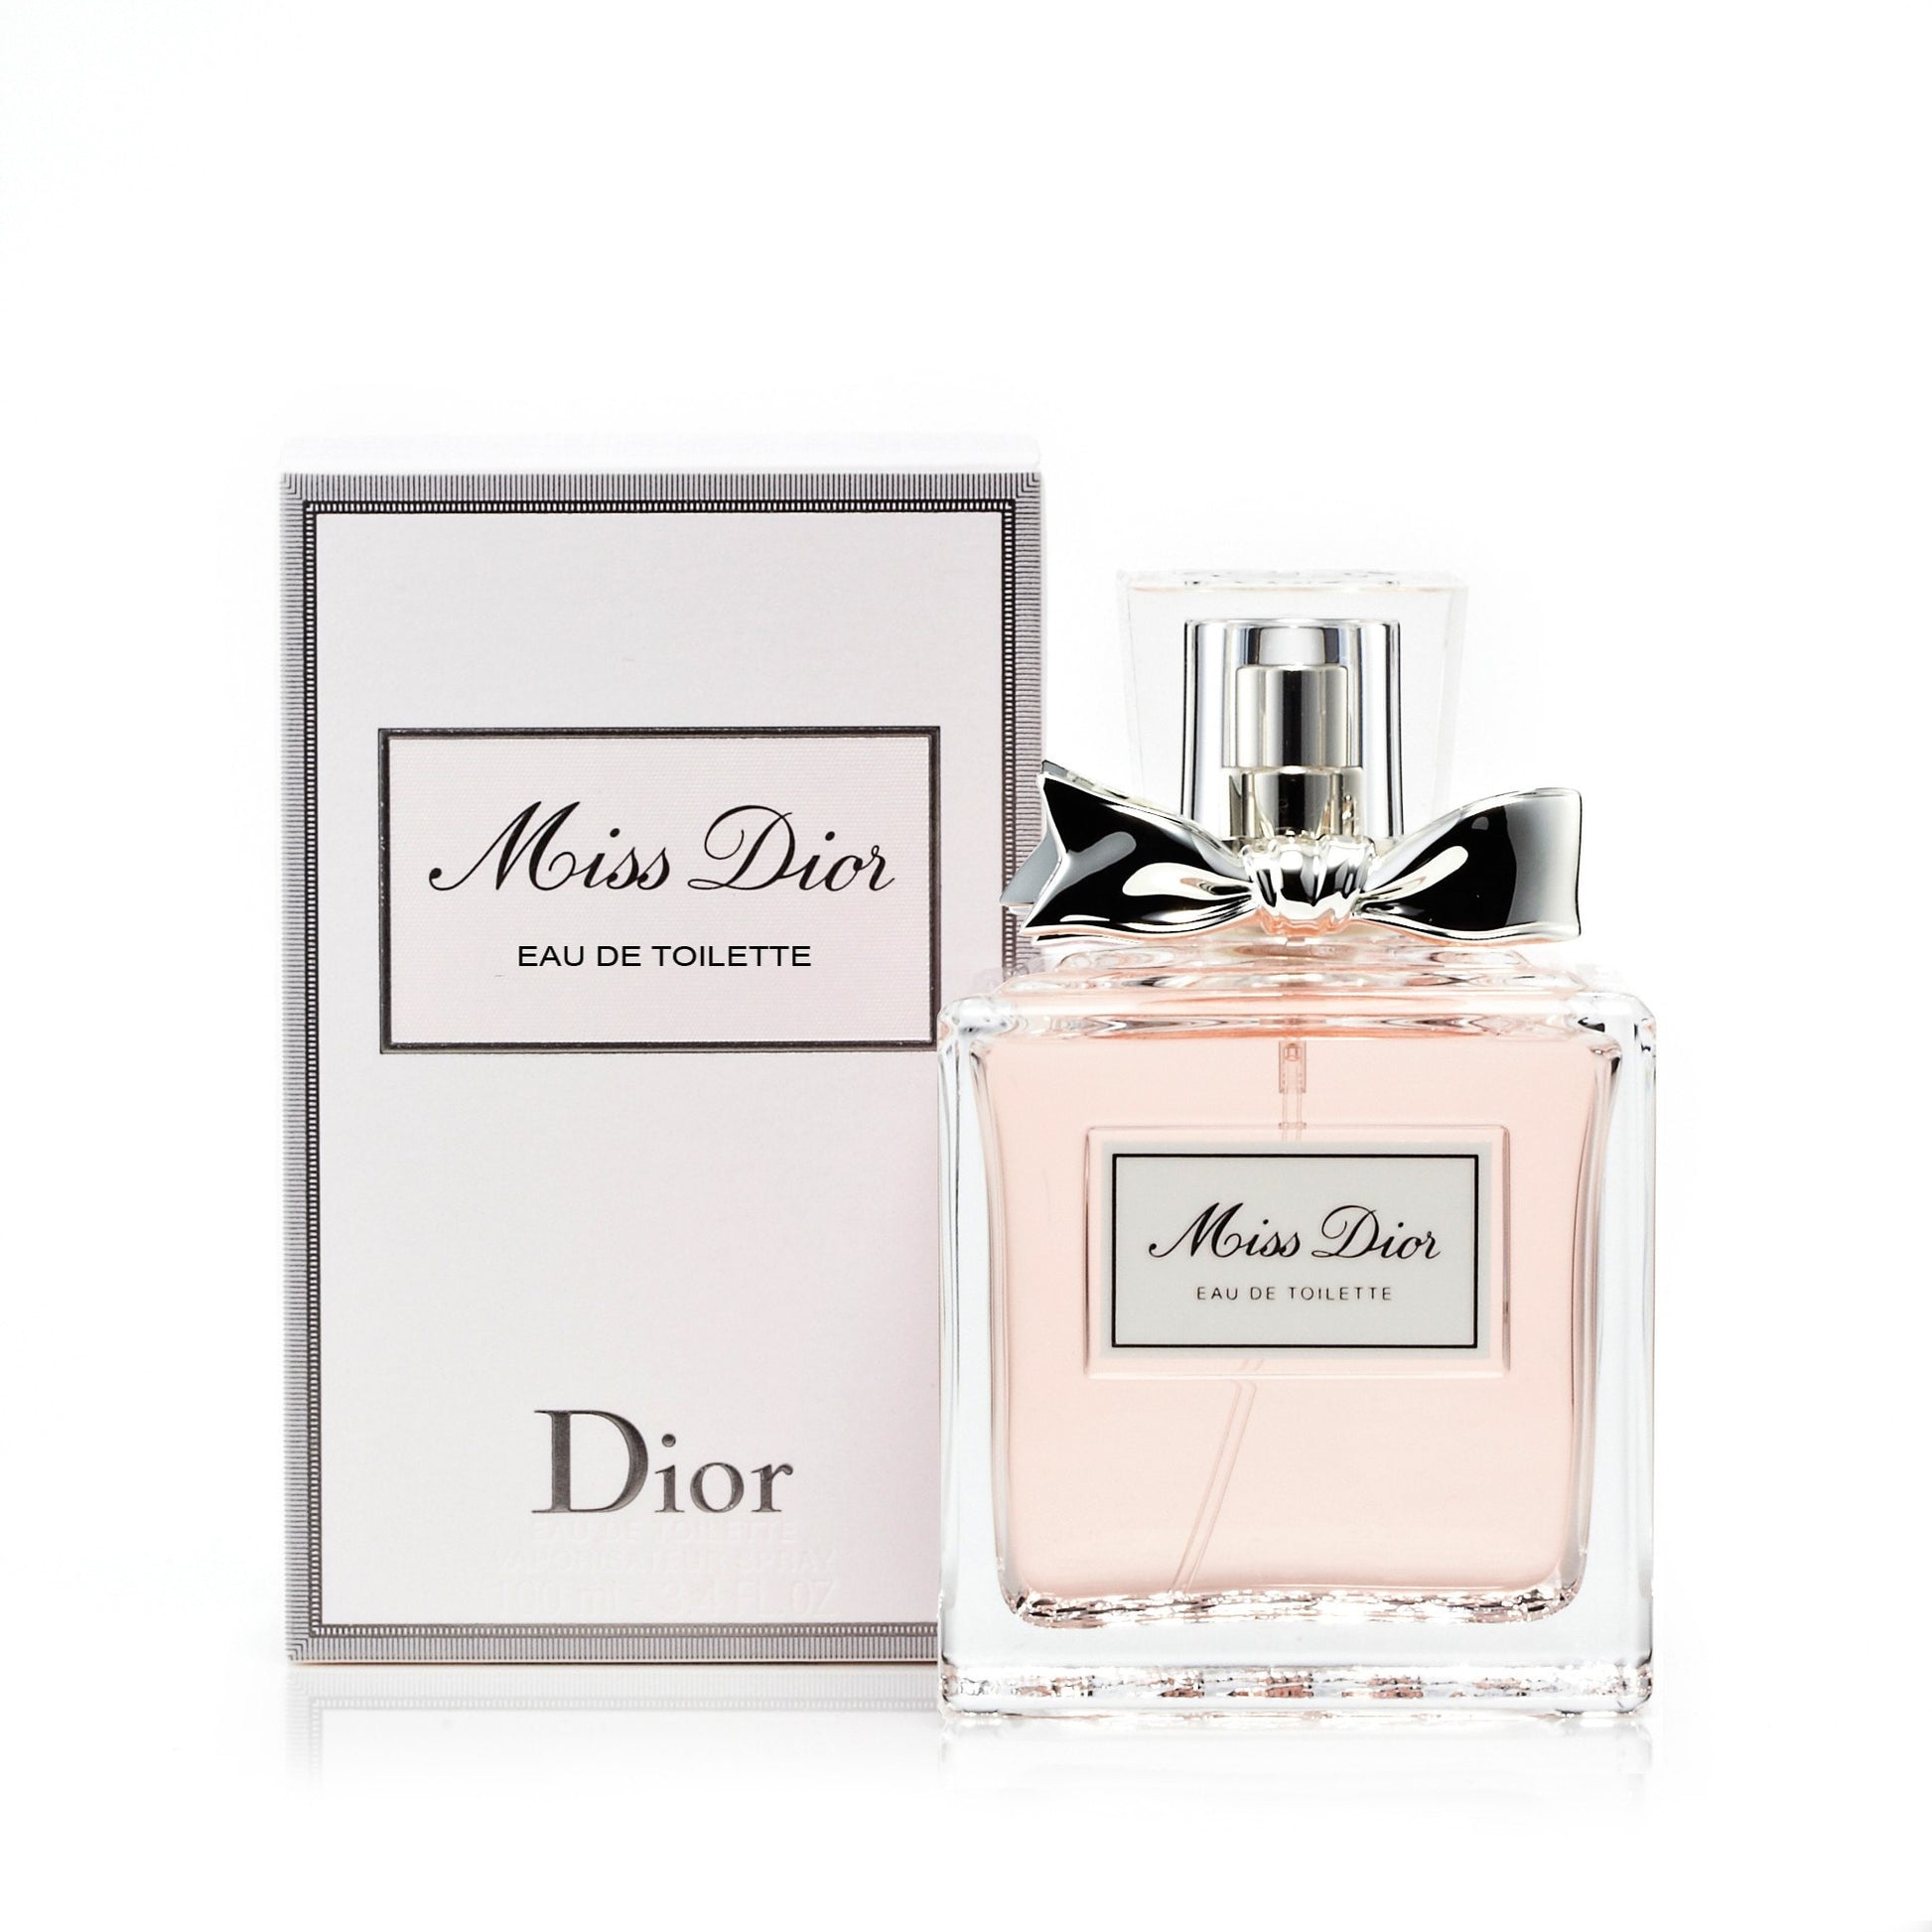 Miss Dior (Miss Dior Cherie) by Christian Dior 